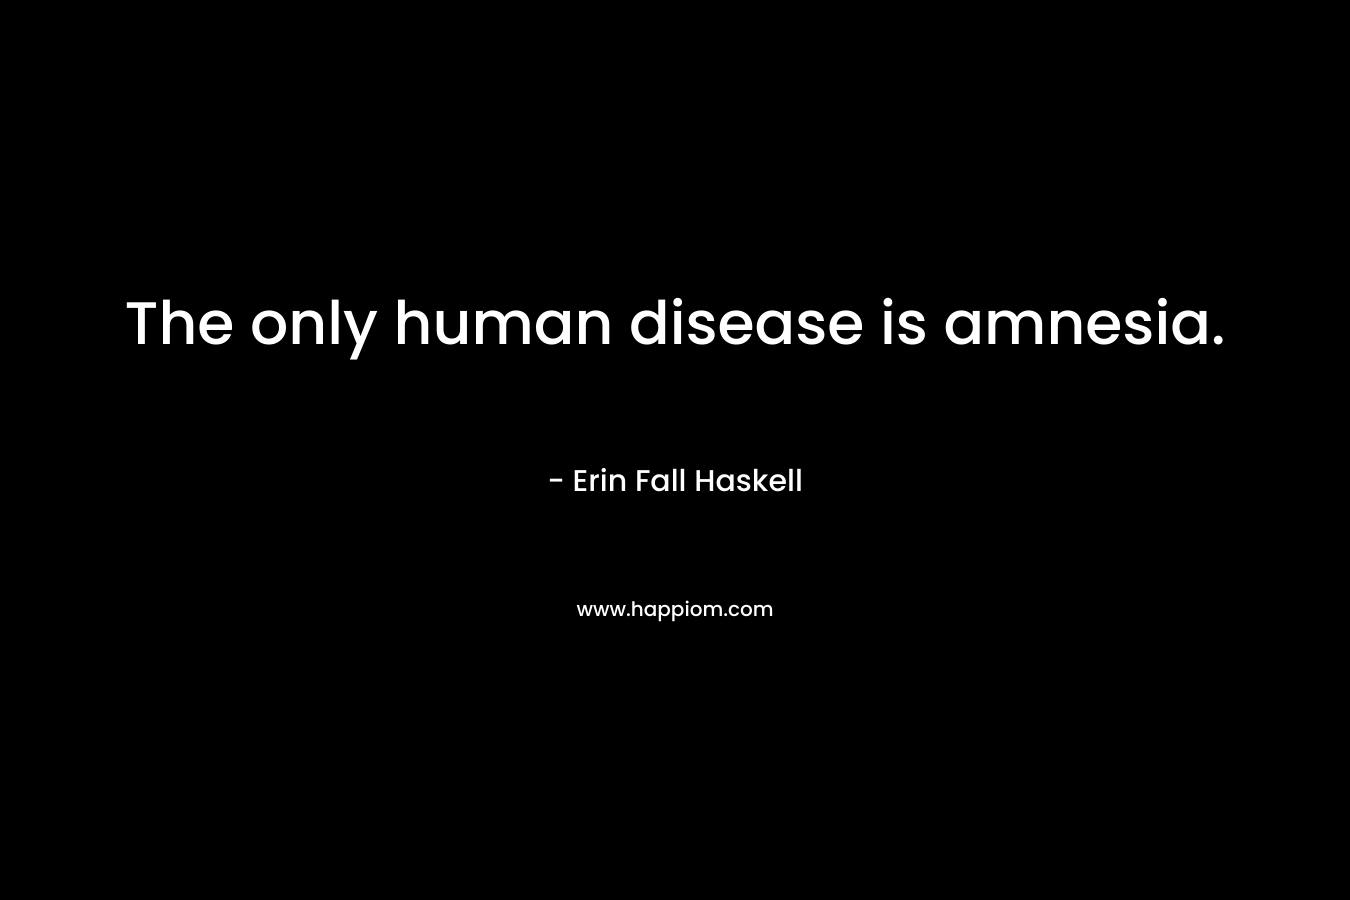 The only human disease is amnesia. – Erin Fall Haskell